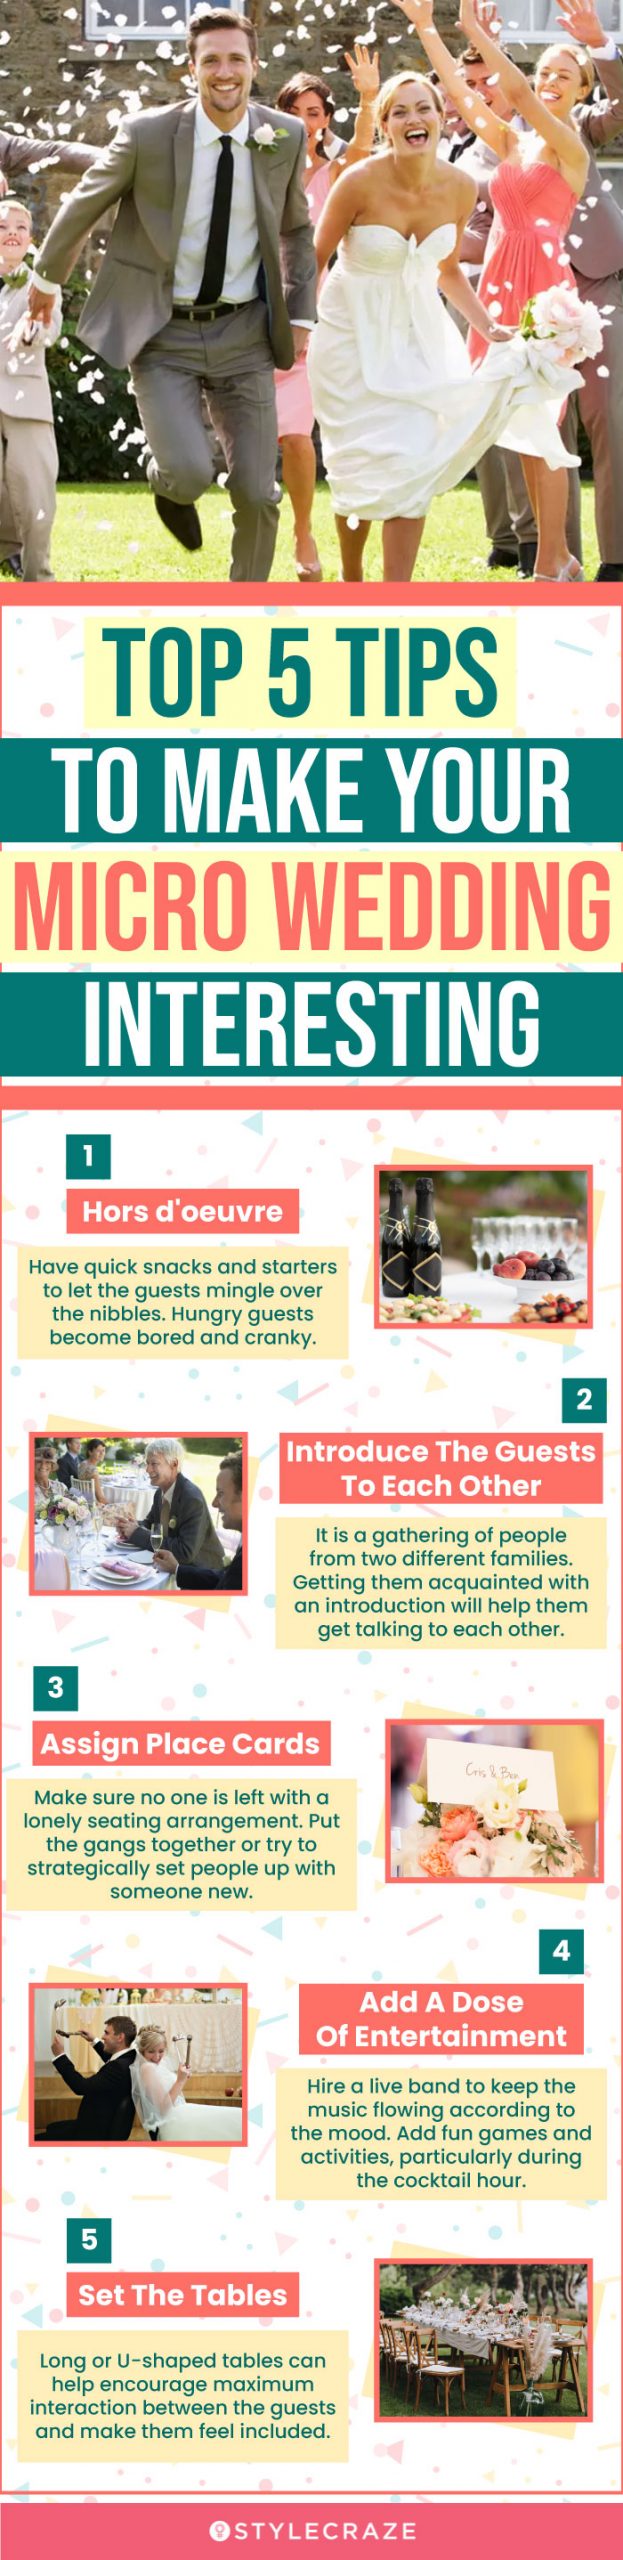 top 5 tips to make your micro wedding interesting (infographic)